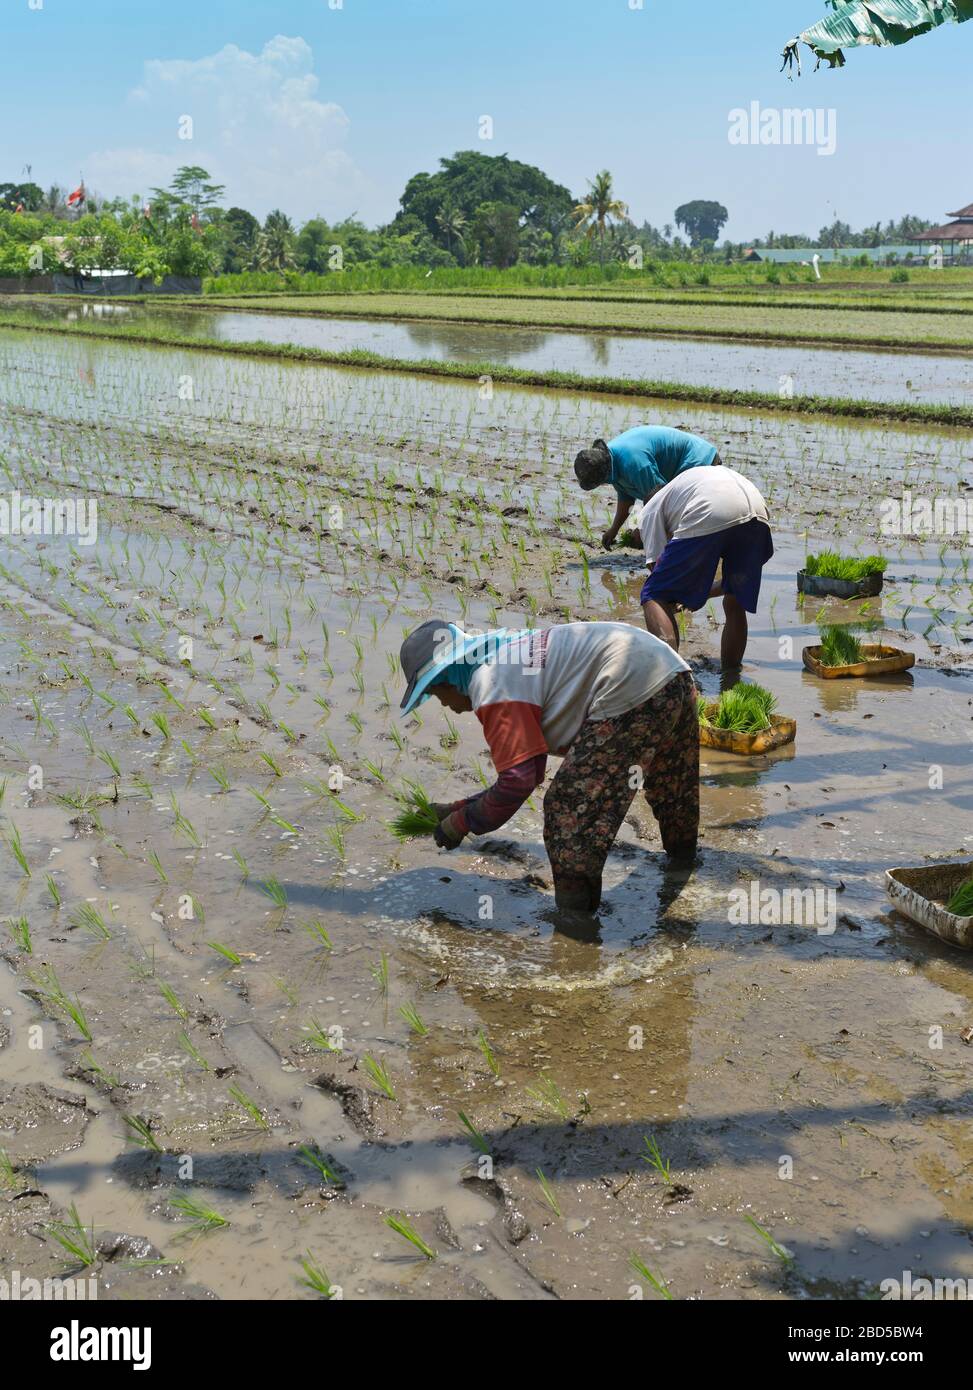 dh Local Balinese workers people BALI INDONESIA Planting rice in paddy field worker farming fields paddies indonesian woman southeast asia women Stock Photo